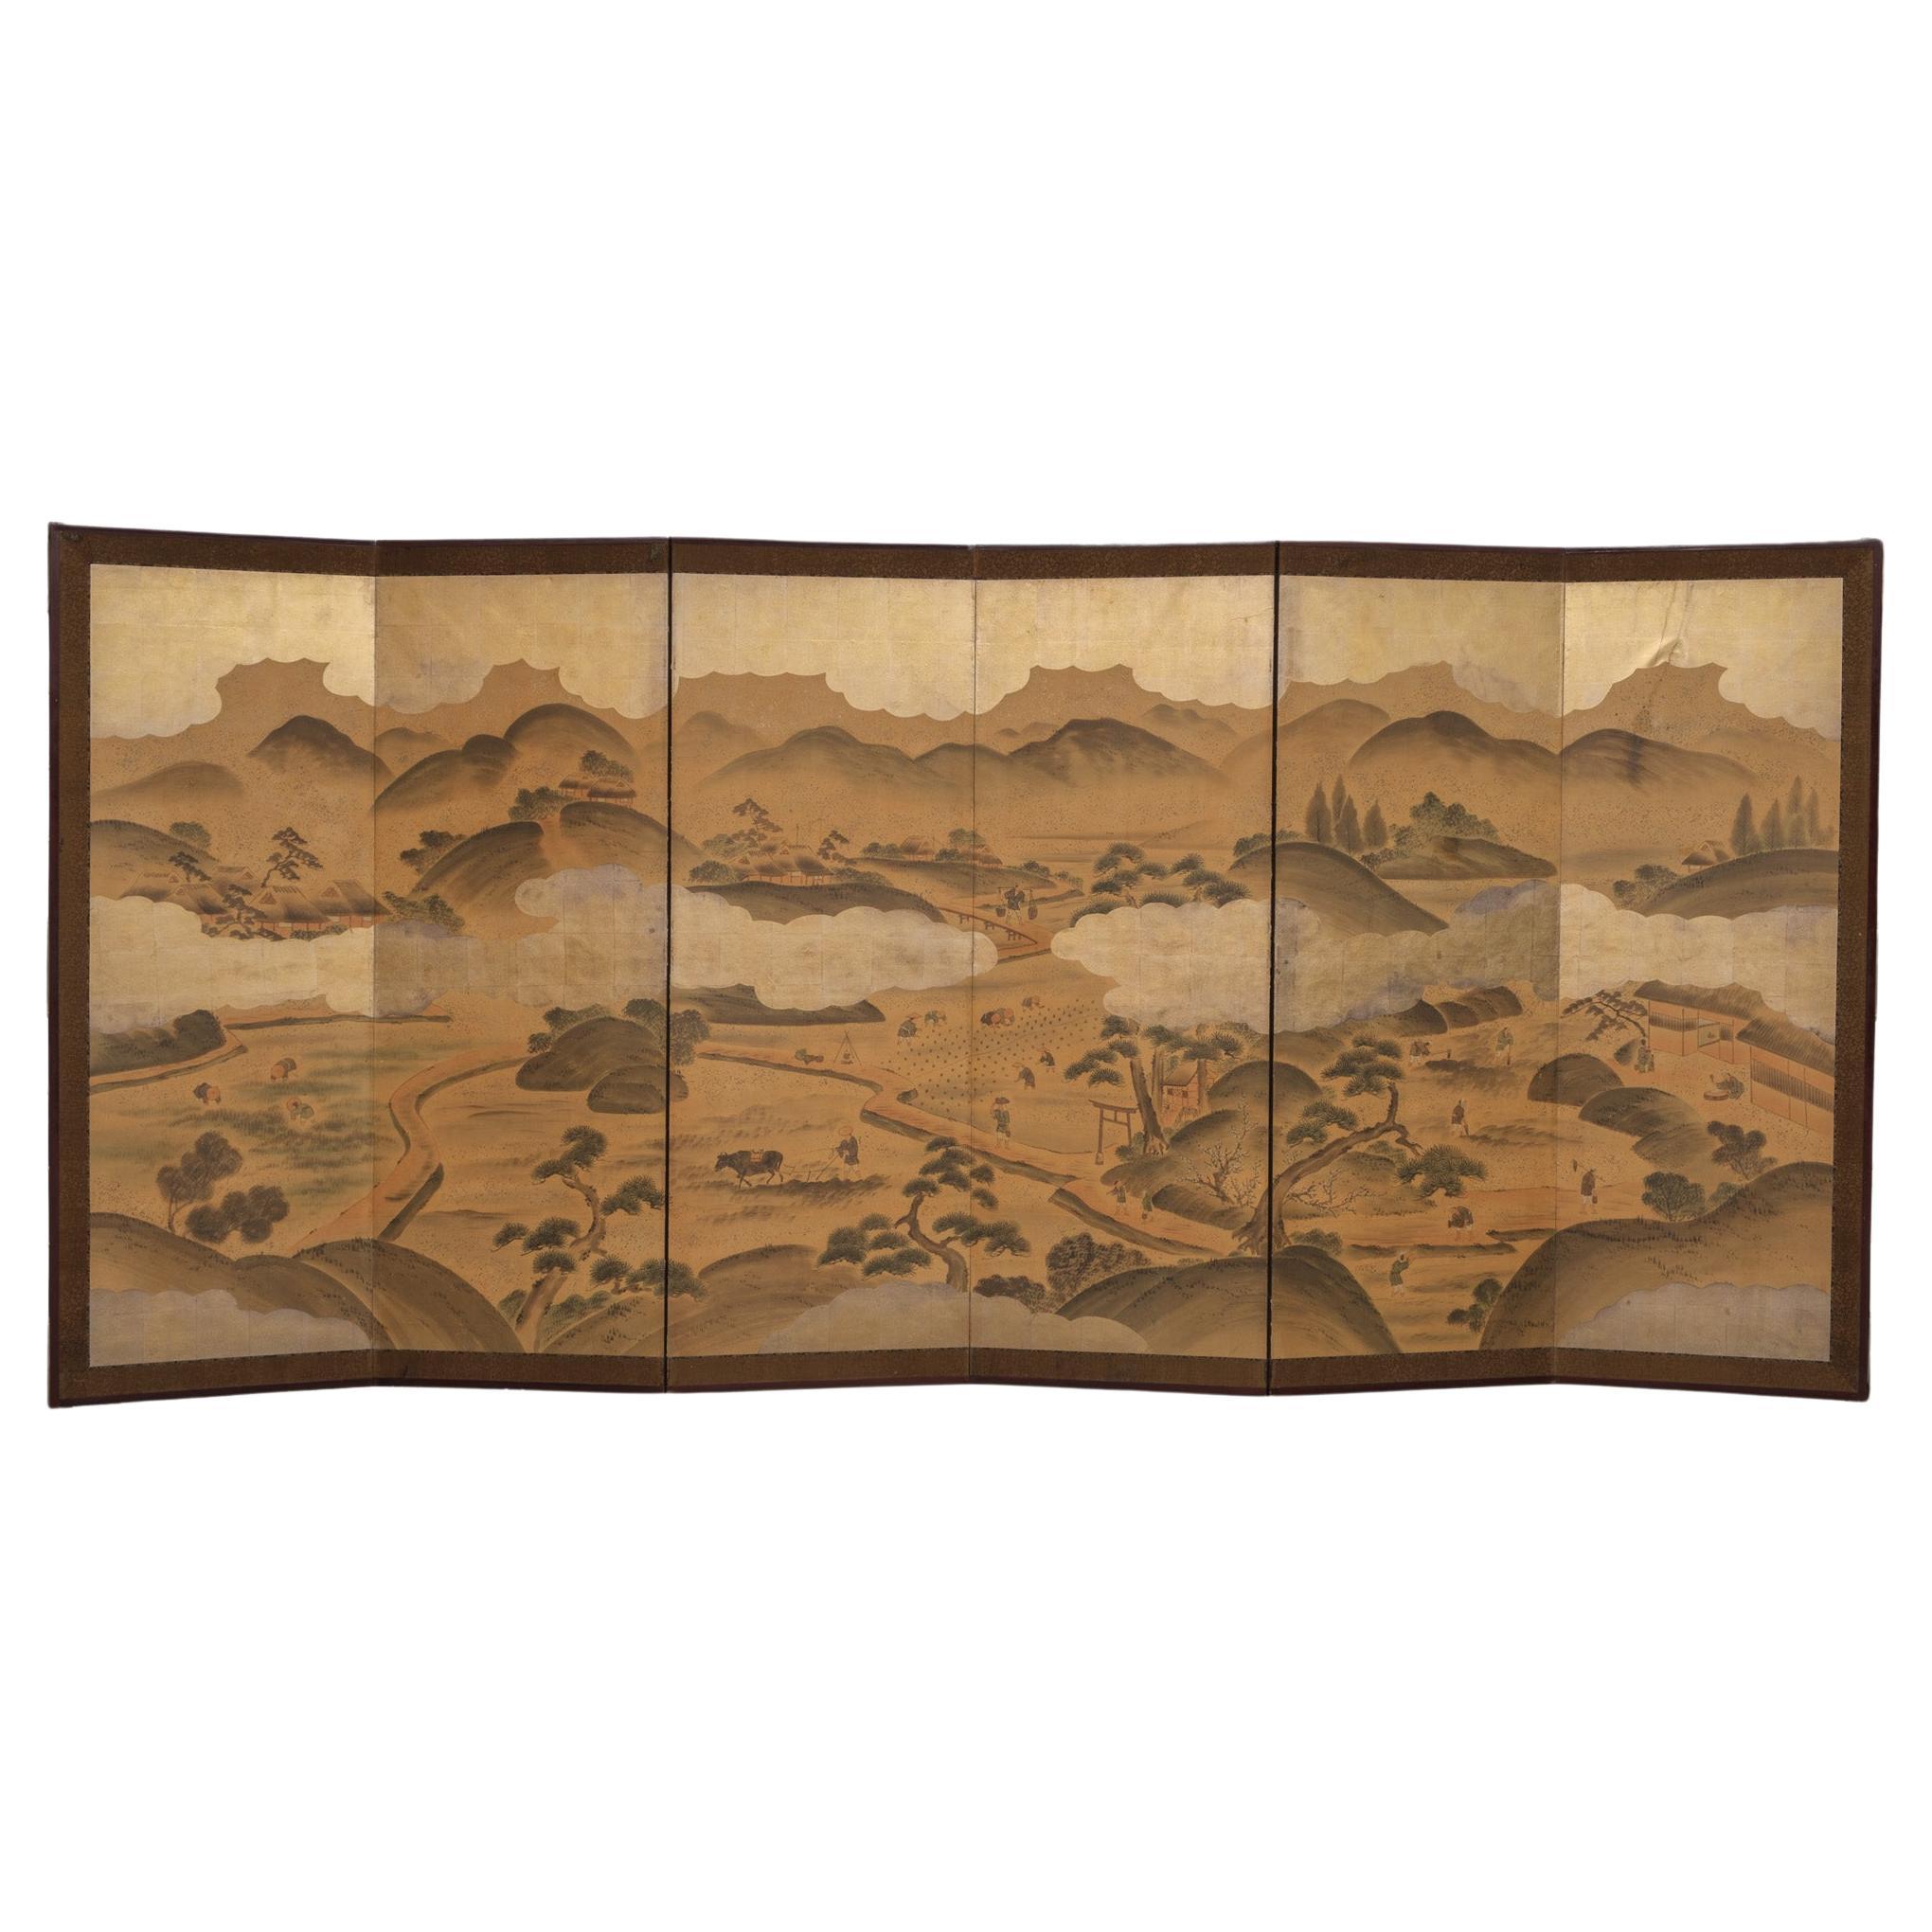 Large Japanese 6-panel byôbu 屏風 (folding screen) with genre painting